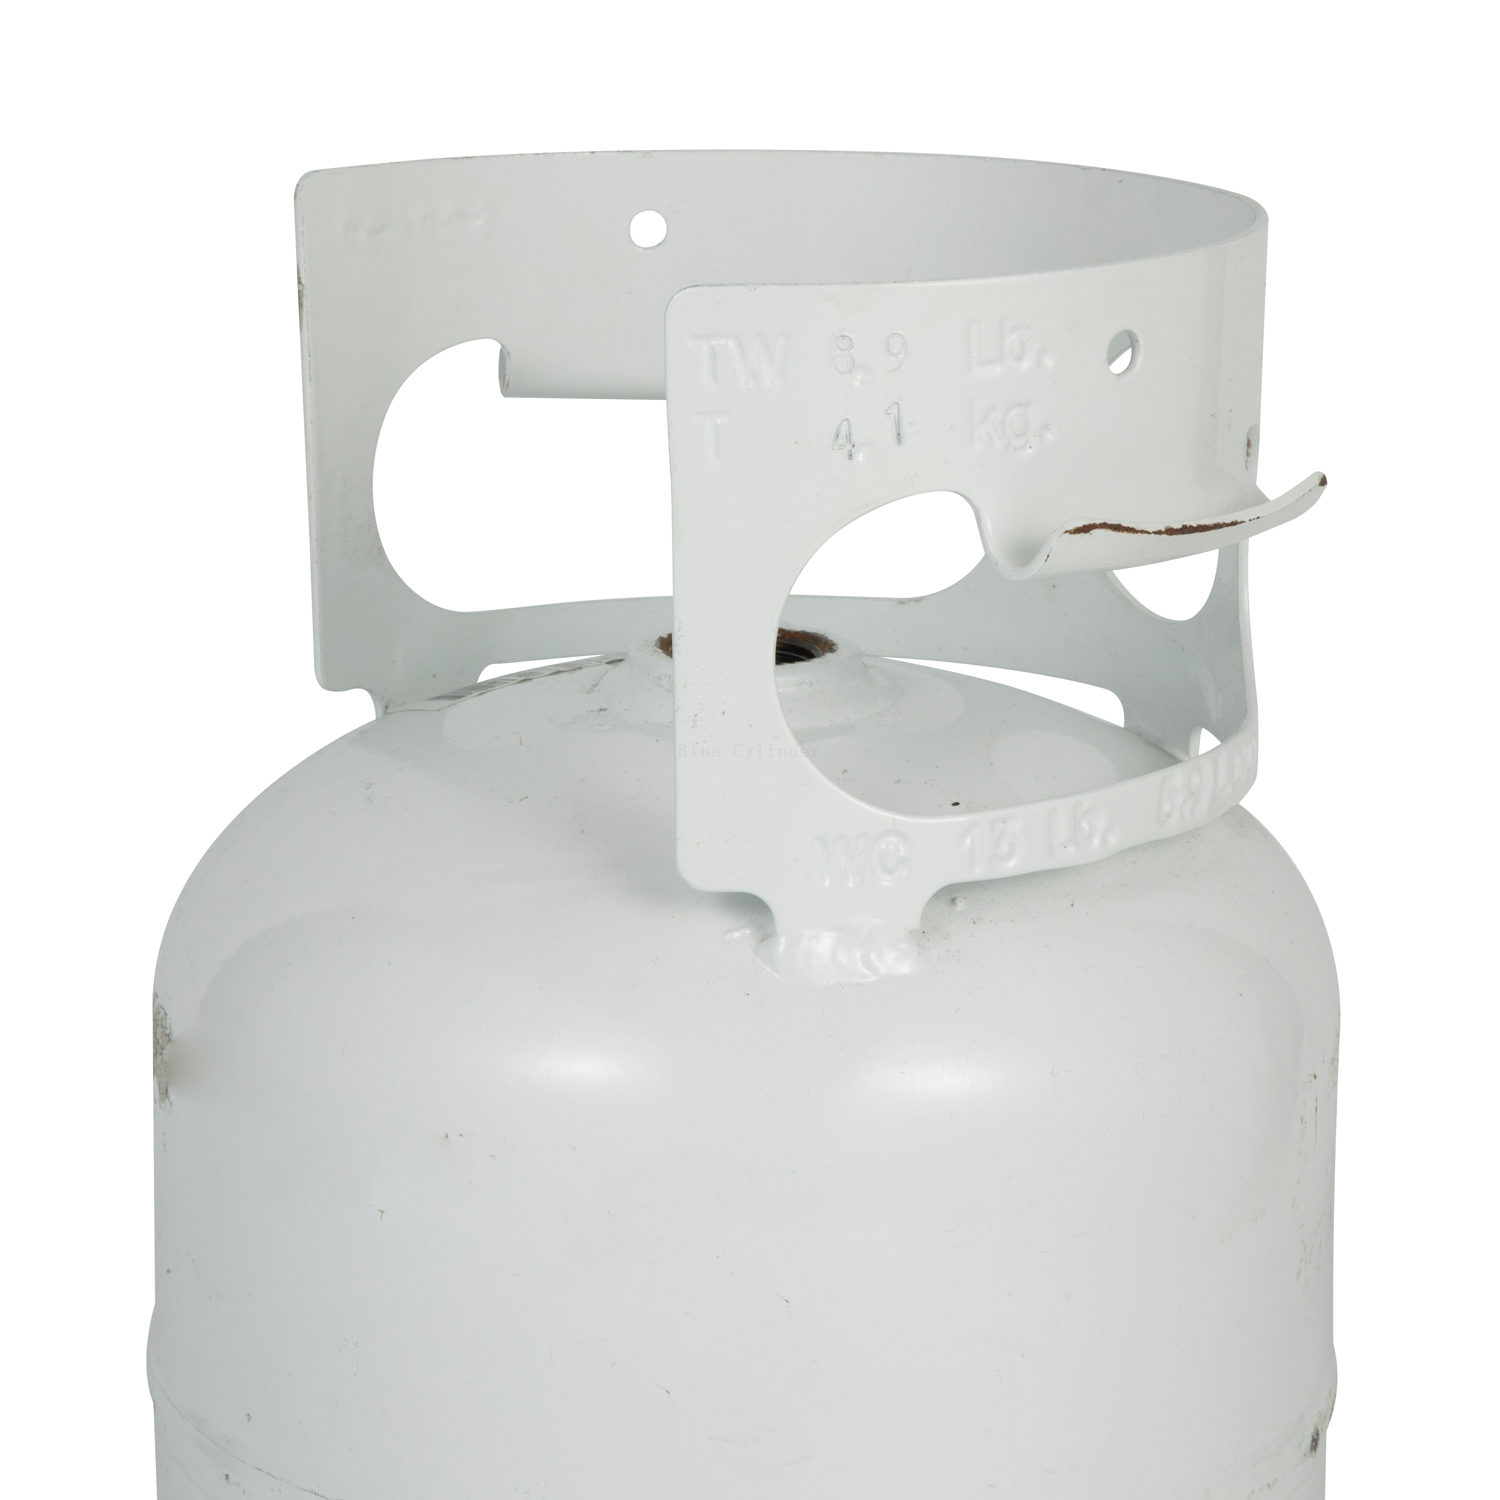 Factory Supply From 3kg To 50kg Lpg Gas Cylinder With Certification Of ISO/CE/DOT 